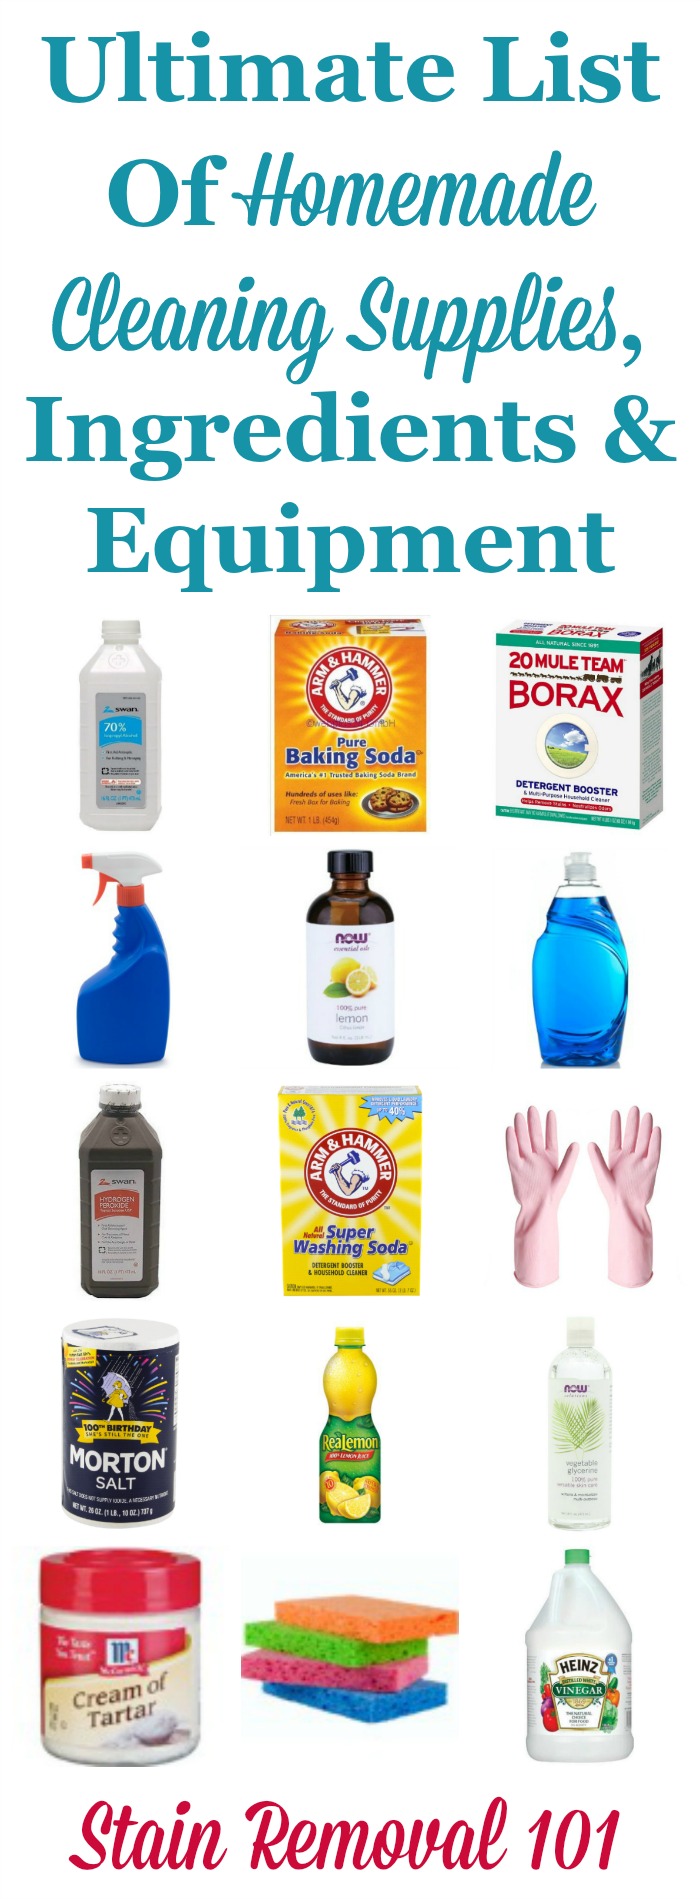 https://www.stain-removal-101.com/image-files/homemade-cleaning-supplies-2.jpg